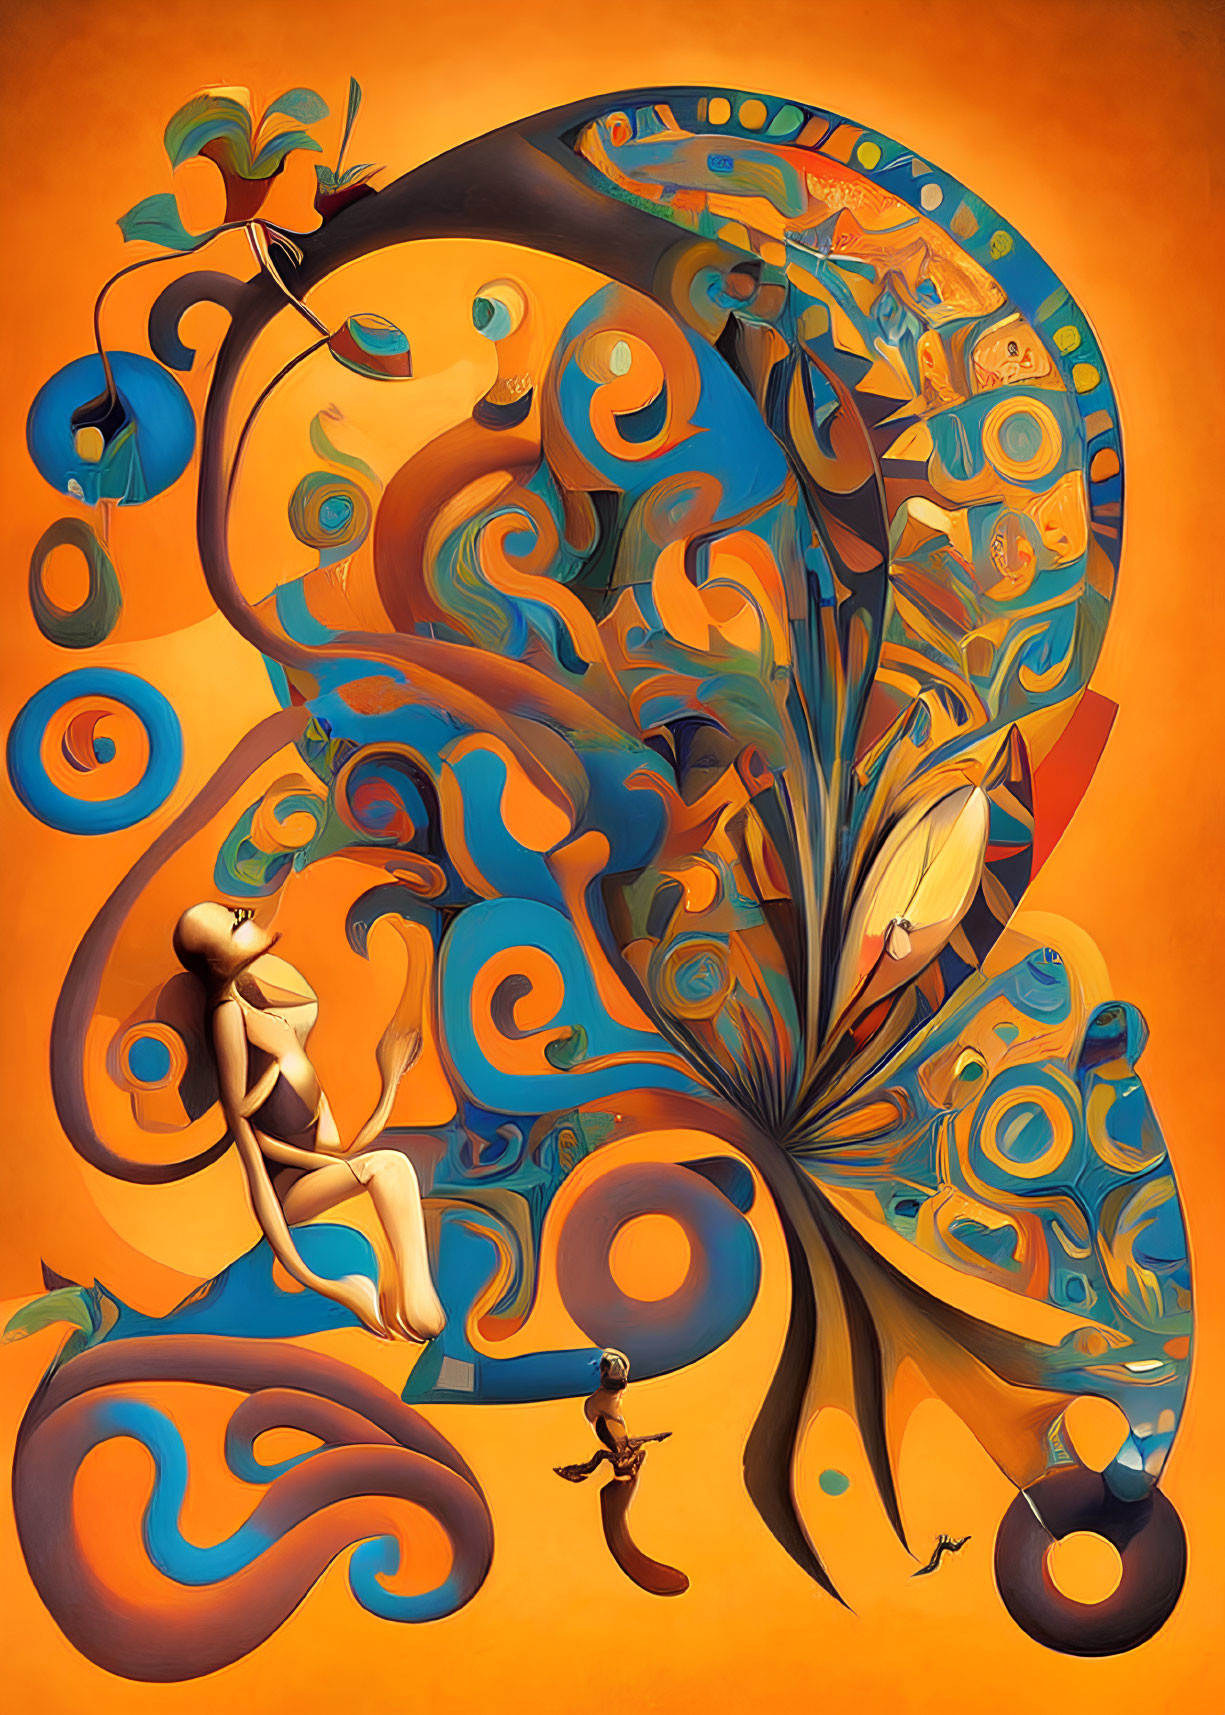 Colorful surreal painting with humanoid figure and whimsical vortex.